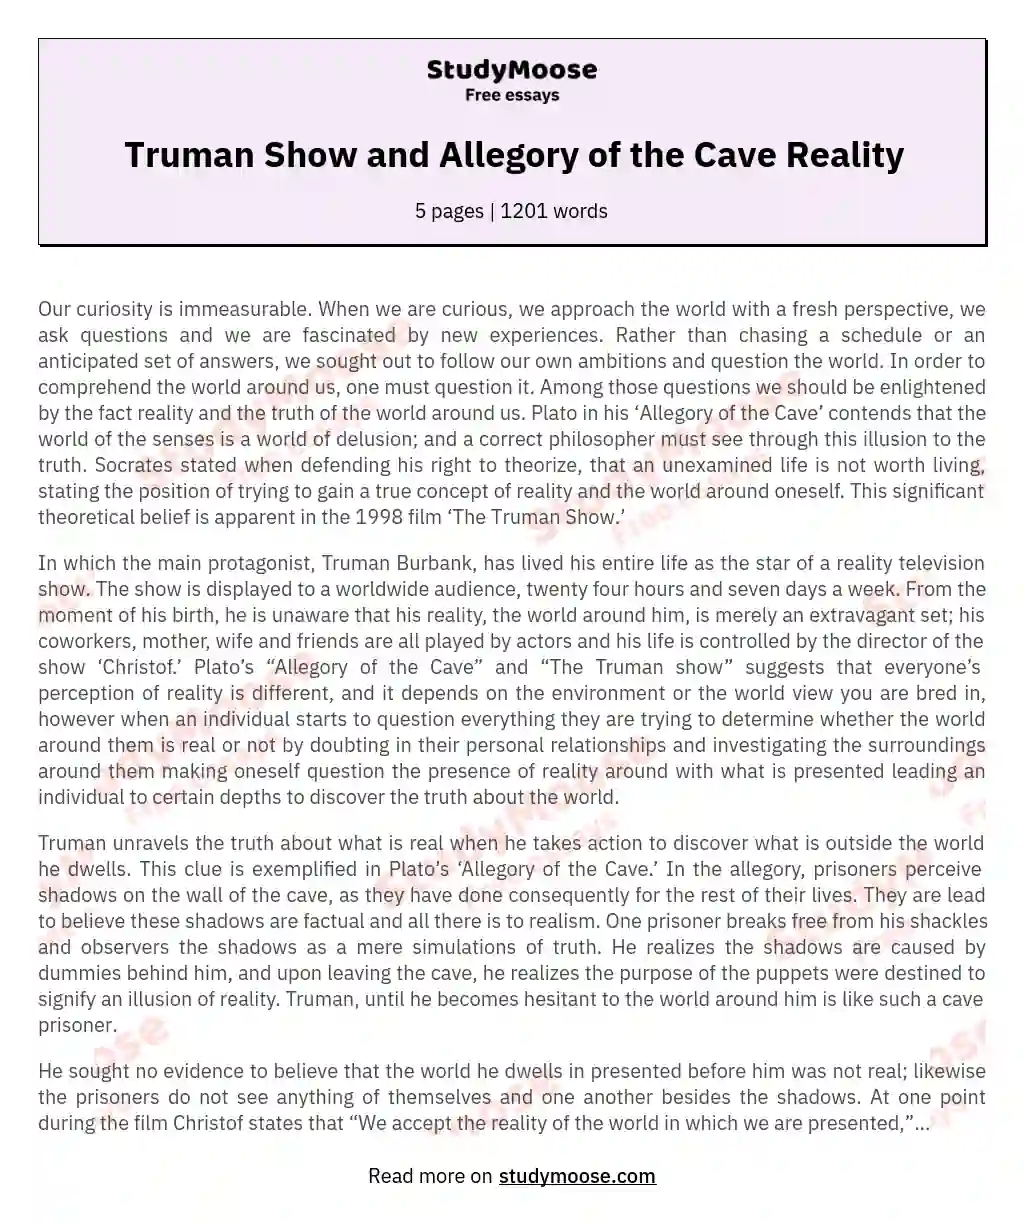 Truman Show and Allegory of the Cave Reality essay